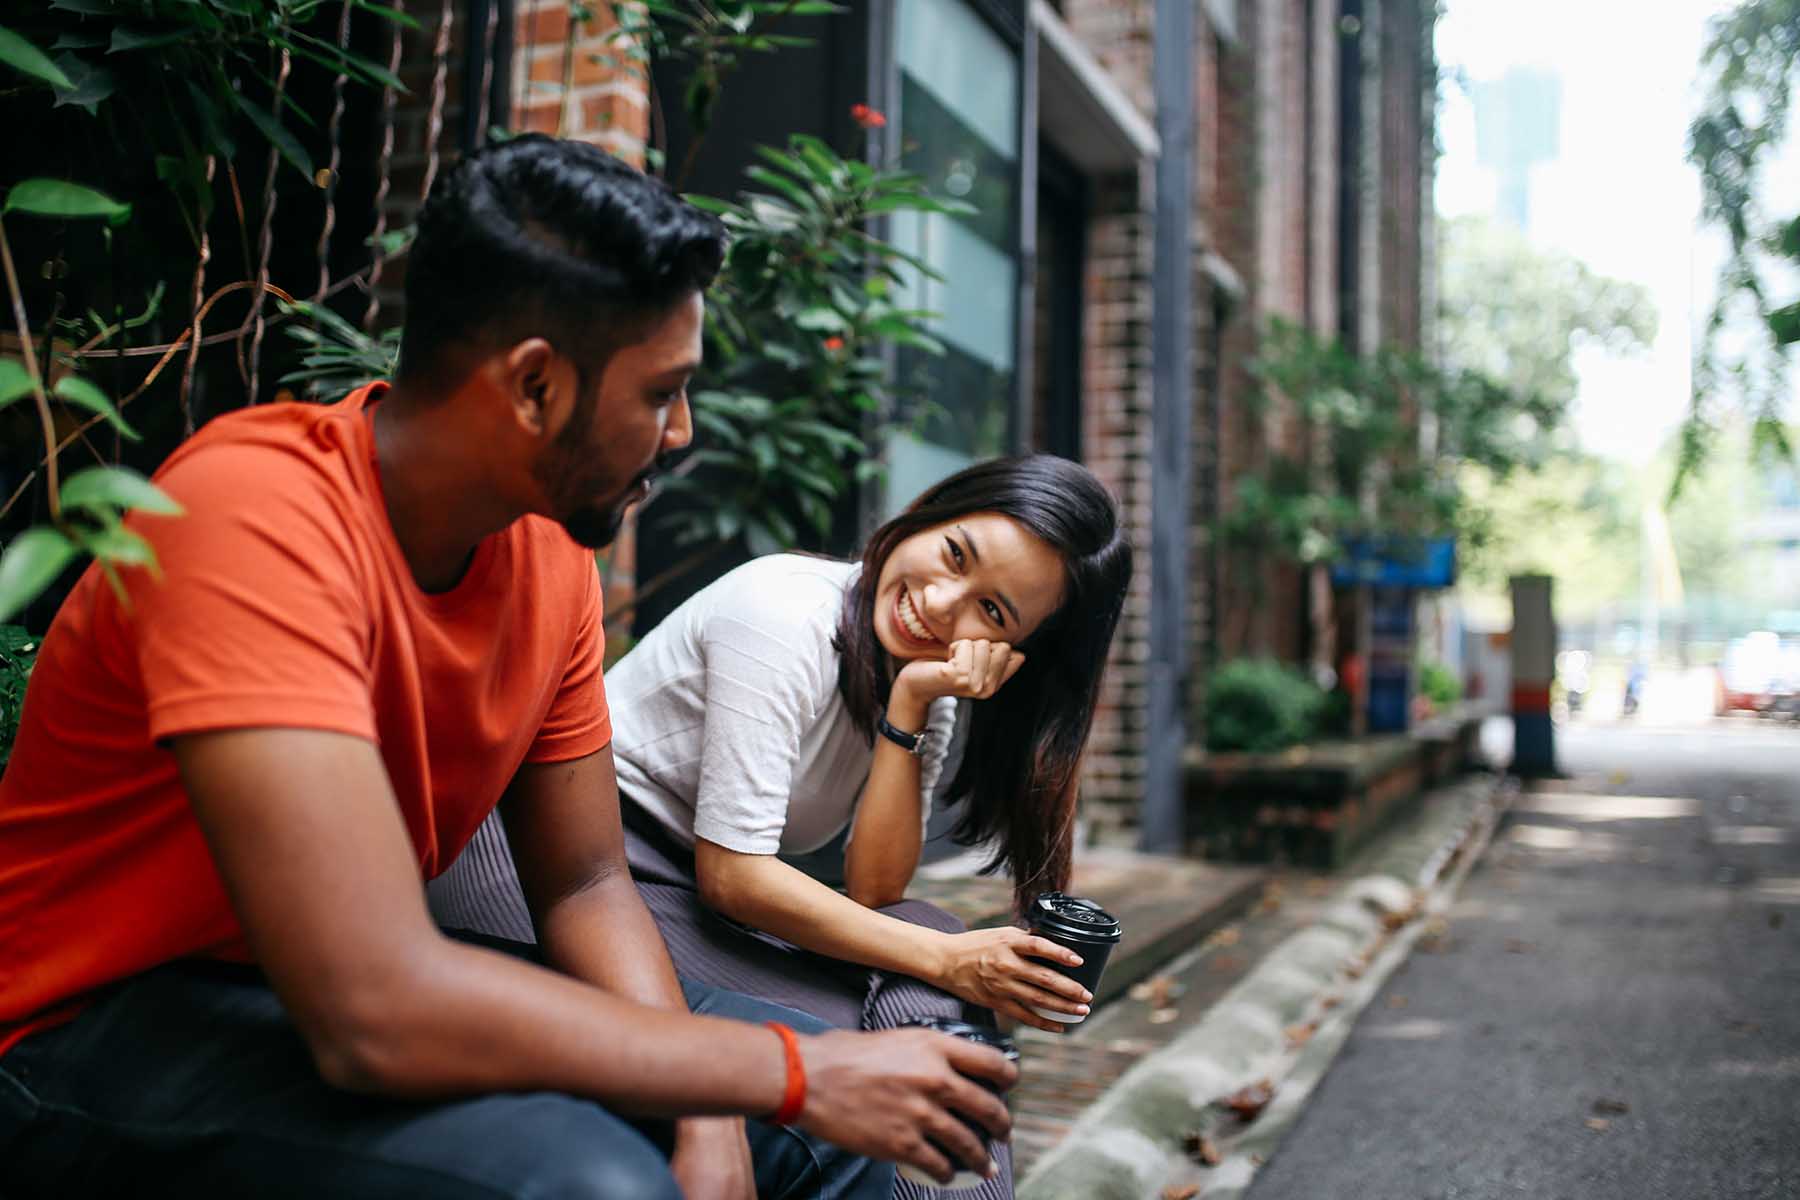 Two people sitting outside on a ledge in an alley. Woman is leaning on her hand, smiling like she's in love at the guy next to her. She's obviously flirting.